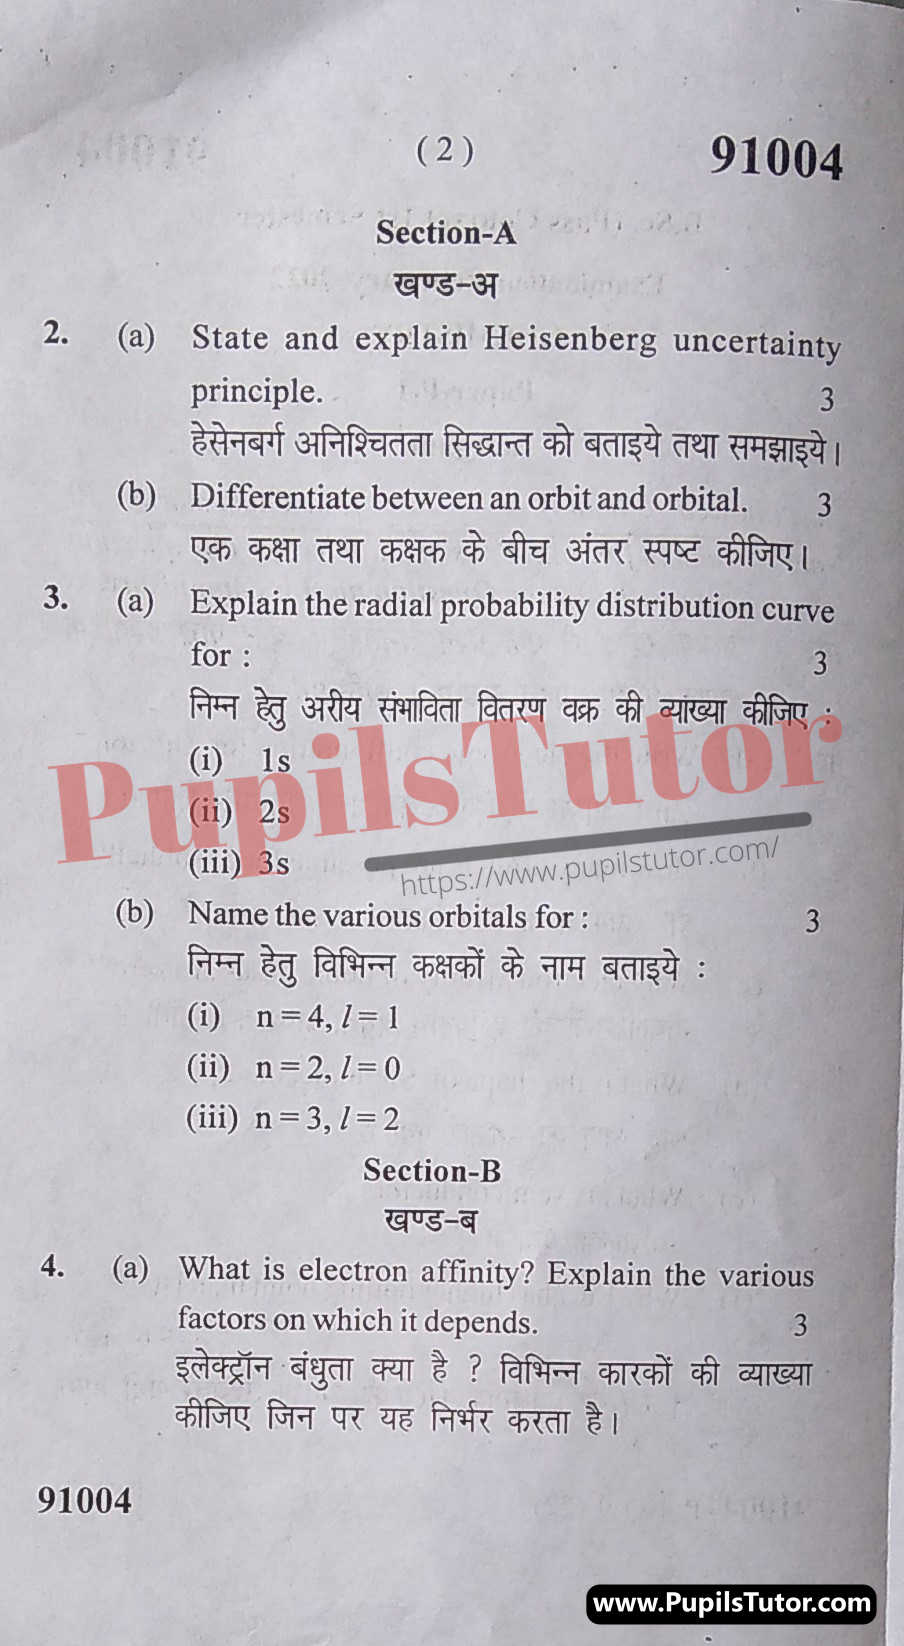 M.D. University B.Sc. [Chemistry] Inorganic First Semester Important Question Answer And Solution - www.pupilstutor.com (Paper Page Number 2)